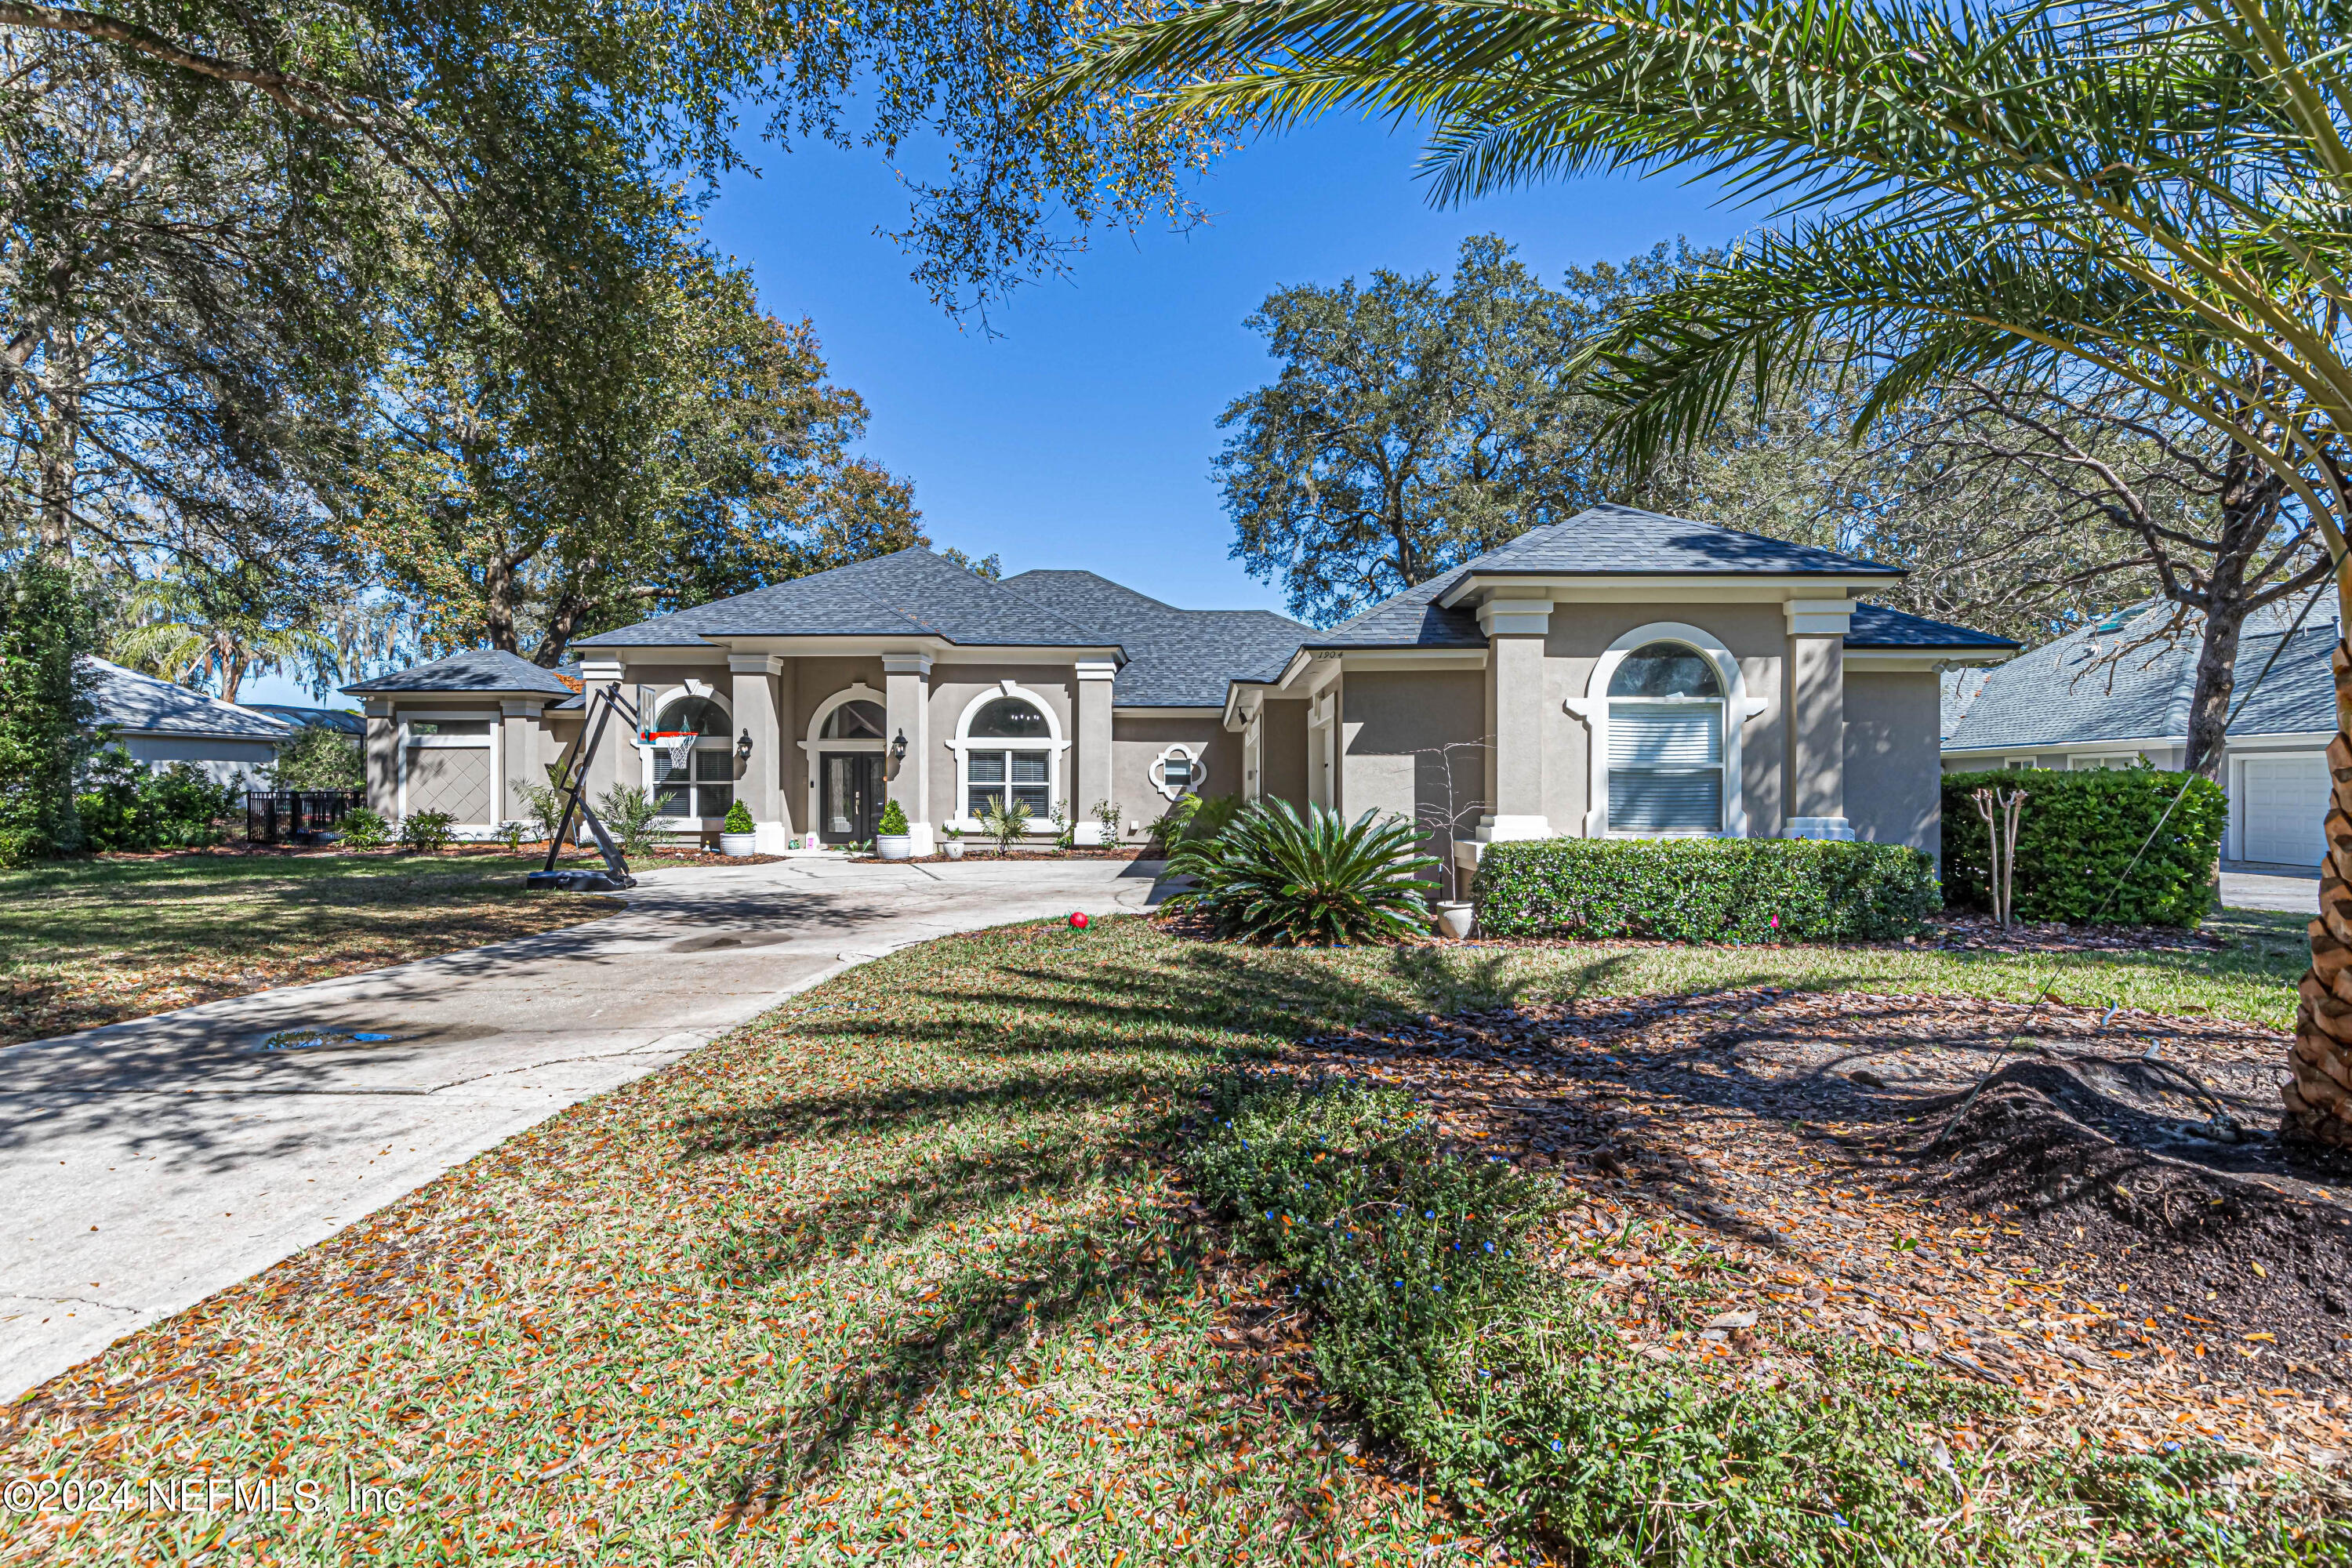 Green Cove Springs, FL home for sale located at 1904 QUAKER RIDGE Drive, Green Cove Springs, FL 32043